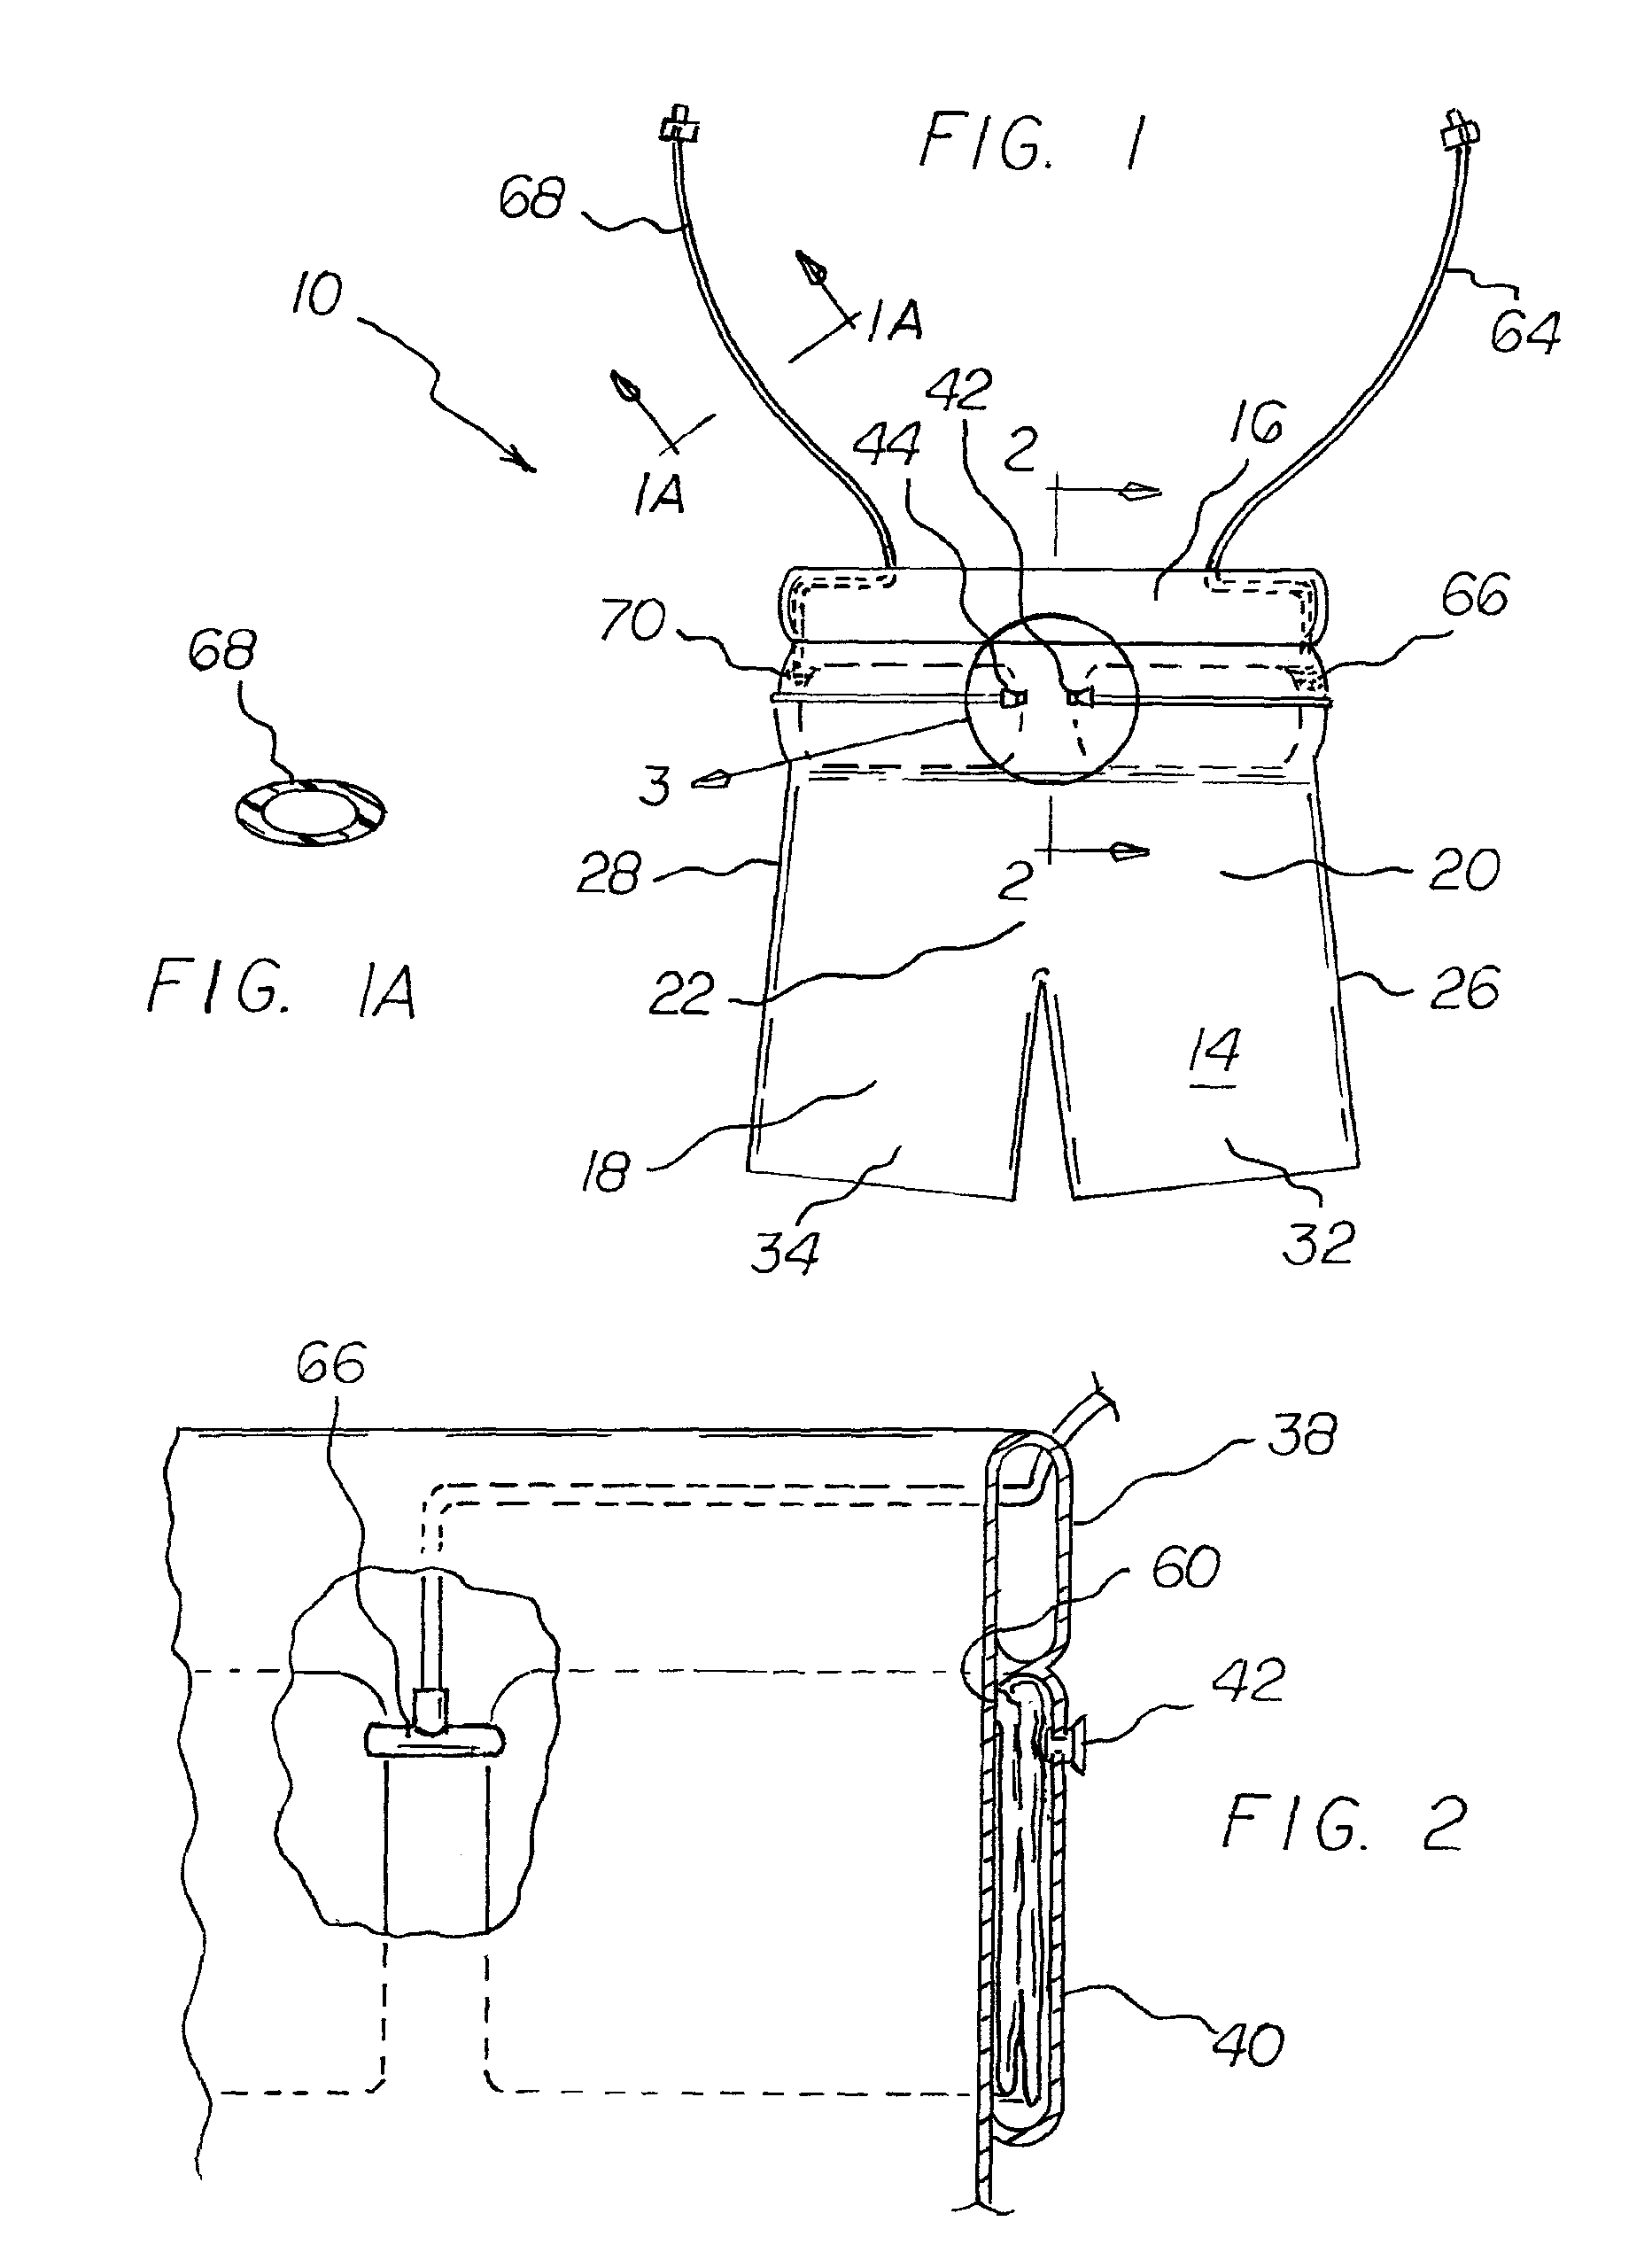 Inflatable bathing suit system